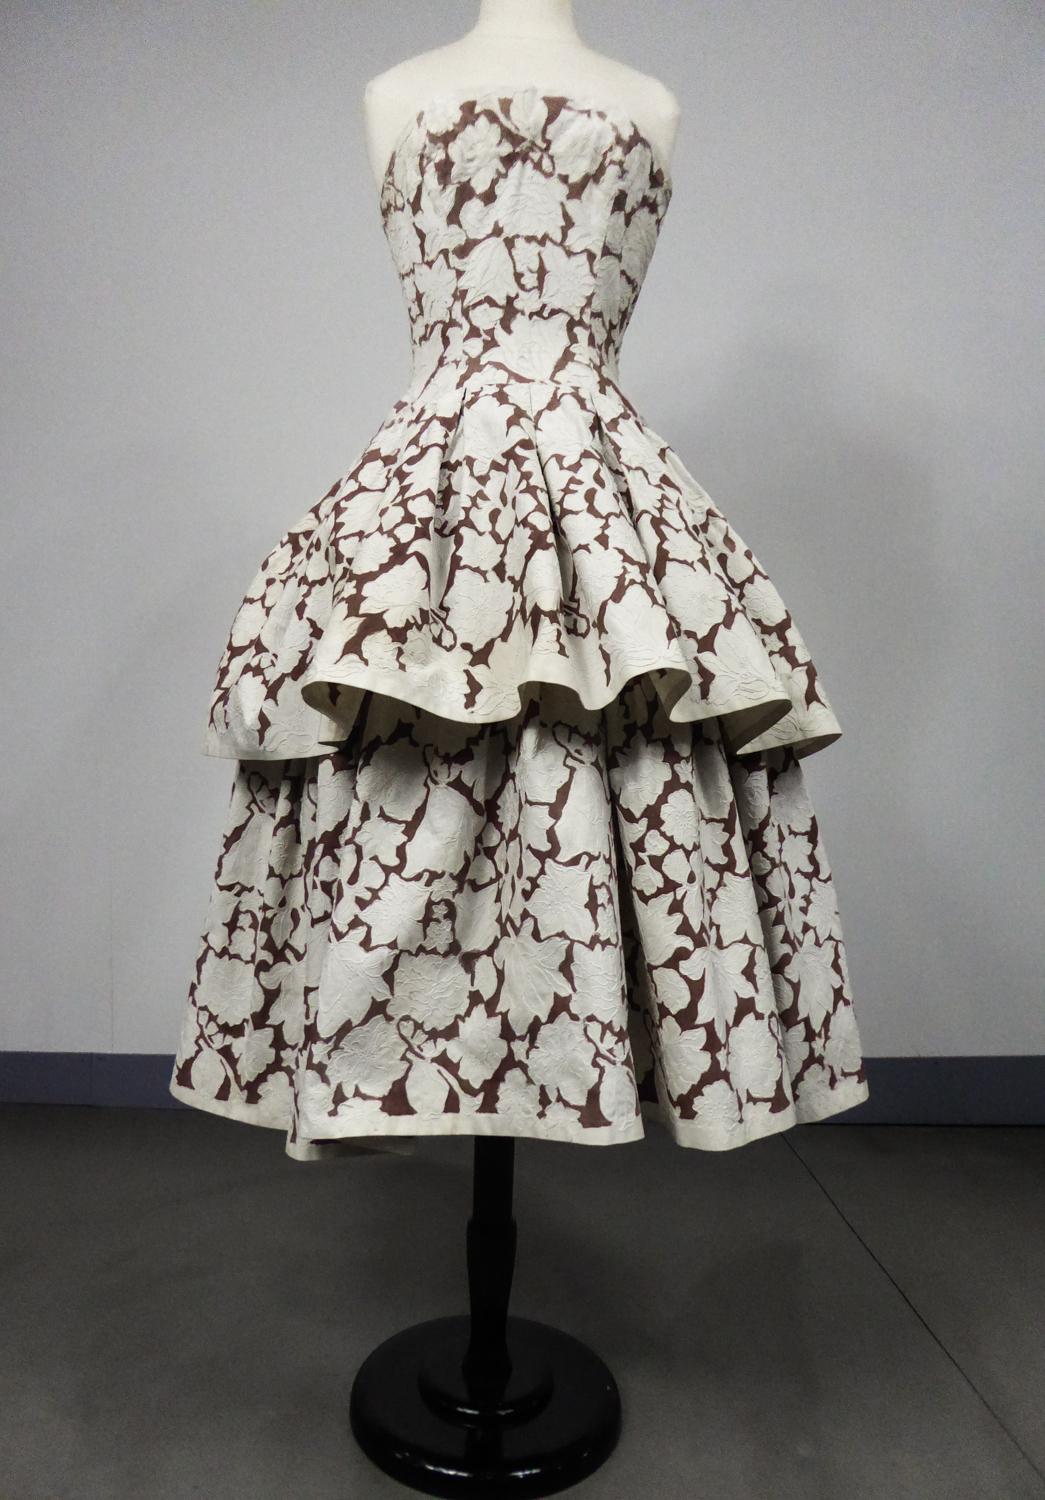 Circa 1954/1957
France

Astonishing ball-gown by Christian Dior in printed cotton and embroidered with cream silk dating from 1954/1957. Floral repertoire printed and embroidered with chain stitch according to the Master's favorite themes.